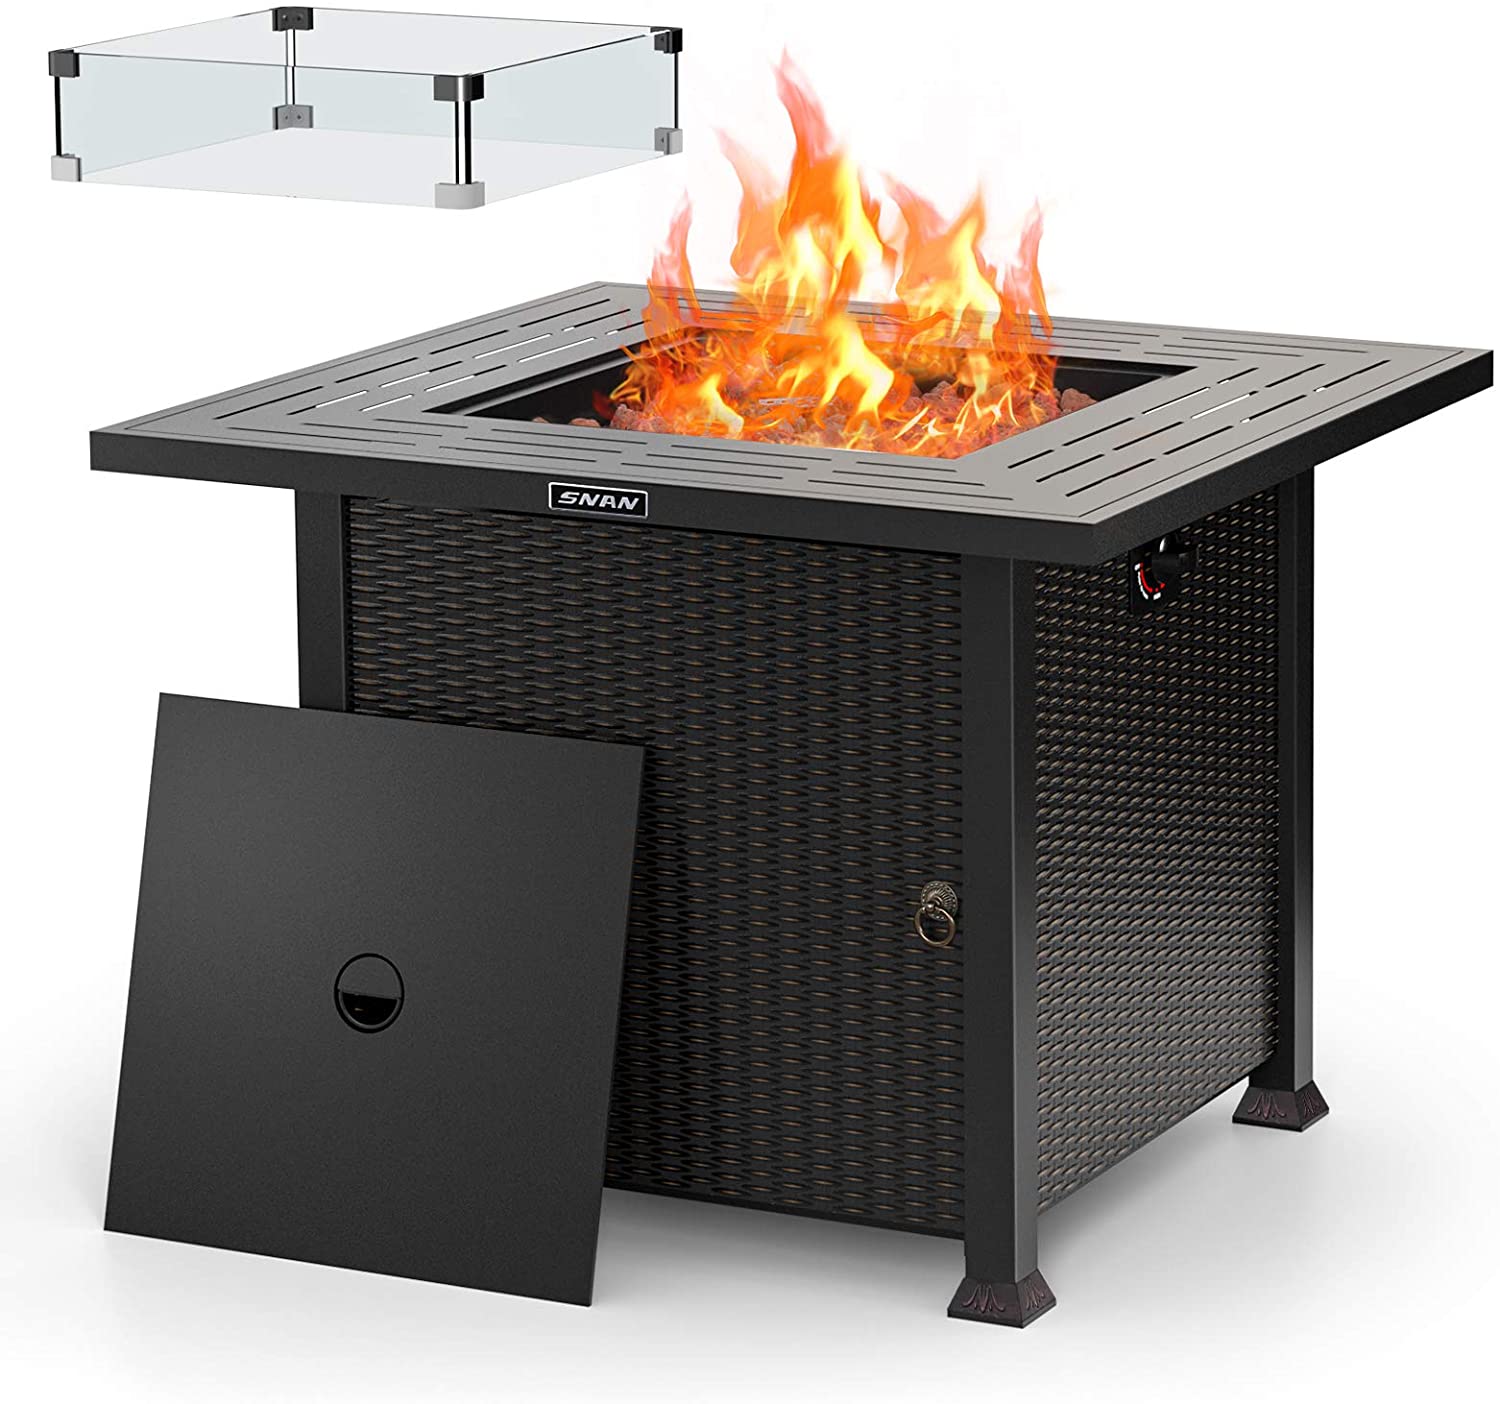 7 Best Fire Pits under $200 Reviewed (Spring 2022)